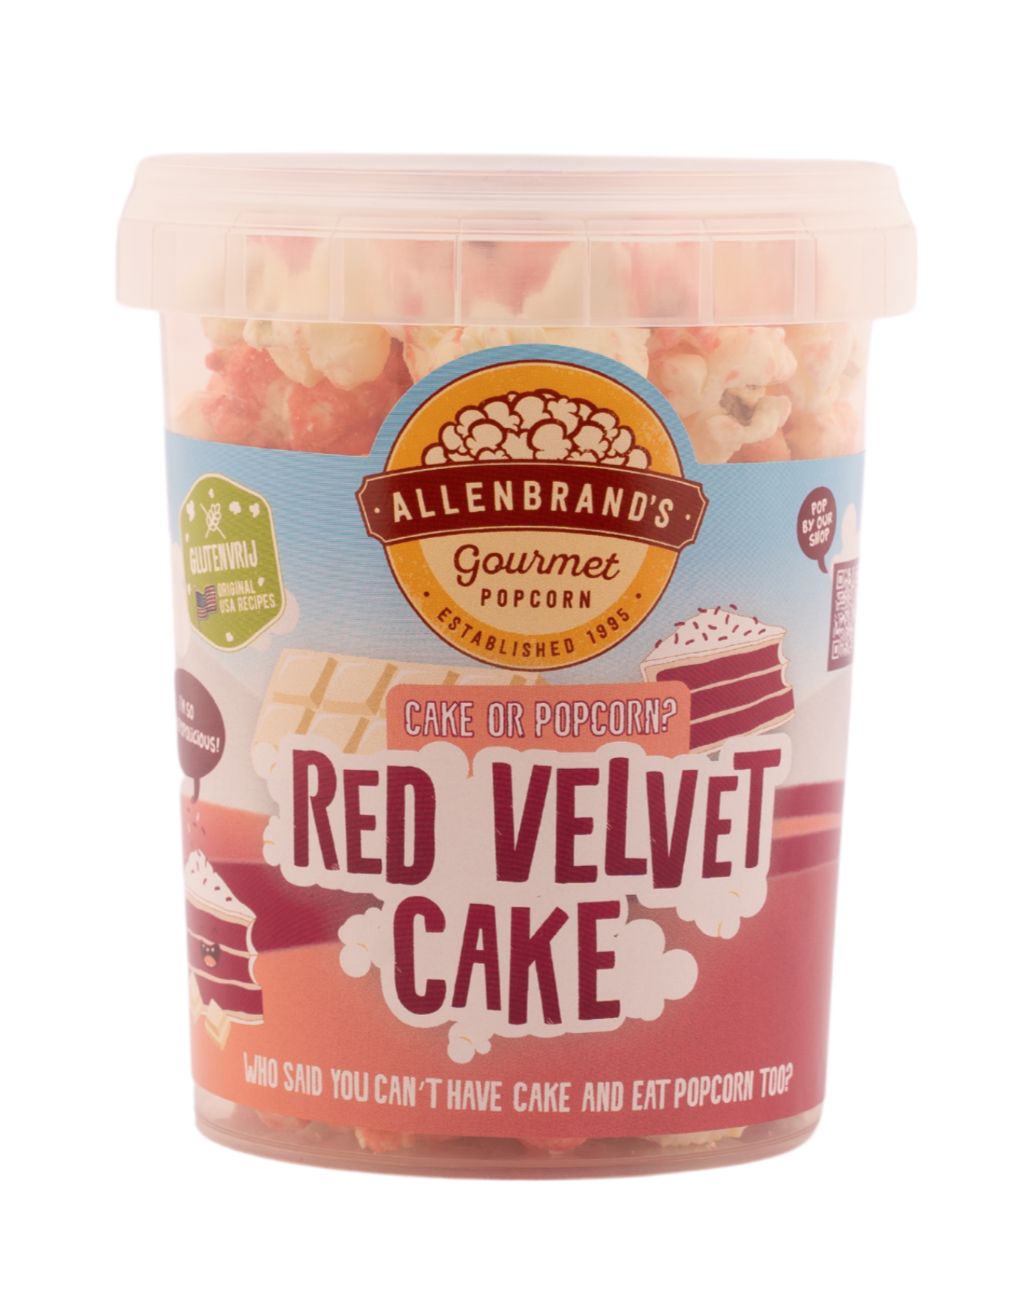 Red Velvet Cake: Who said you can't have cake and eat popcorn too?